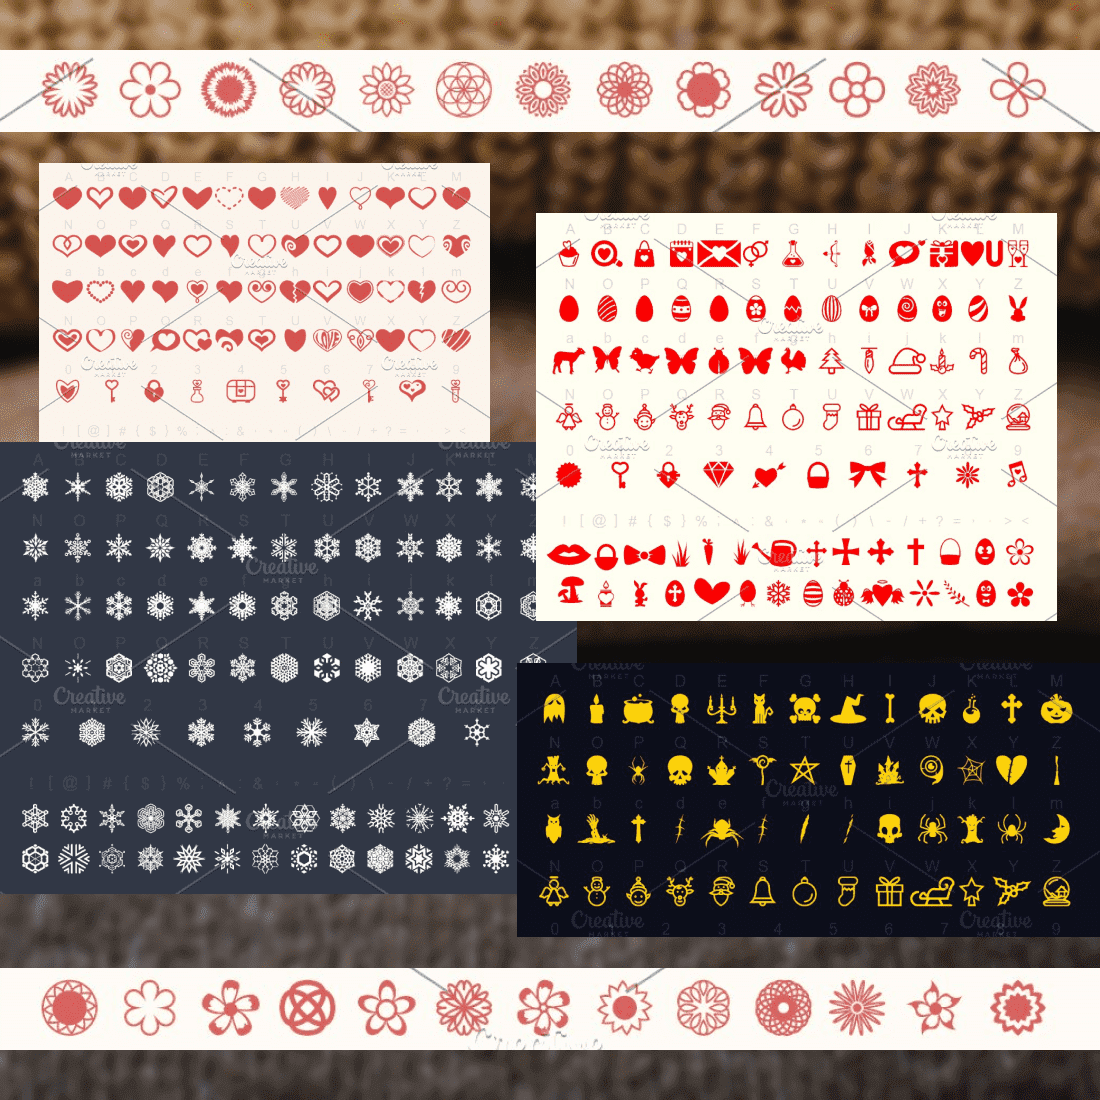 Symbols Font Collection - 450 Shapes cover.